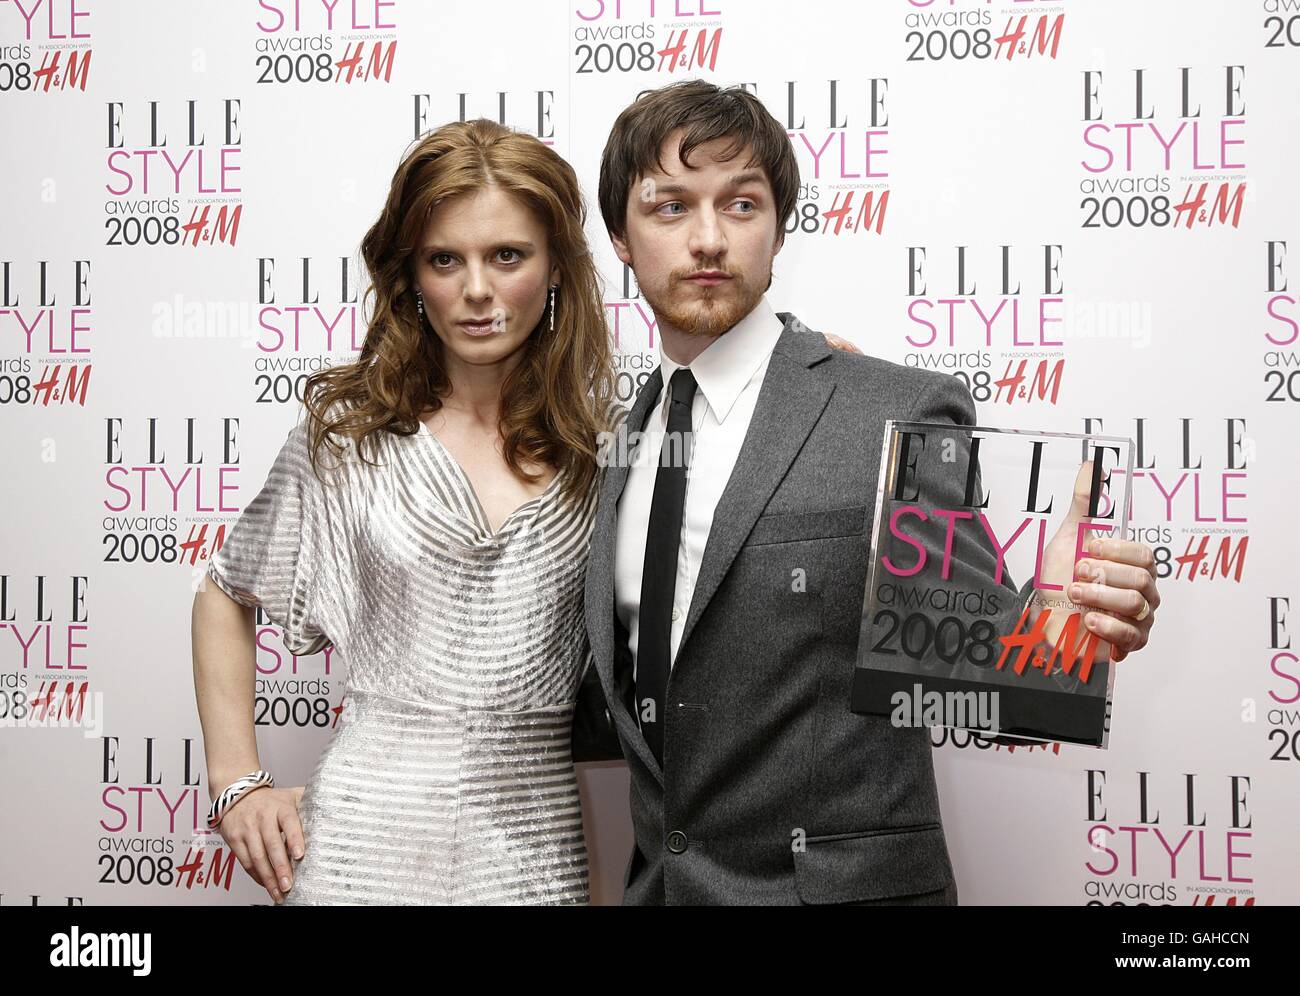 James McAvoy accompanied by Emilia Fox with the award for Best Actor at the ELLE Style Awards 2008, The Westway, off Latimer Road, W10 Stock Photo